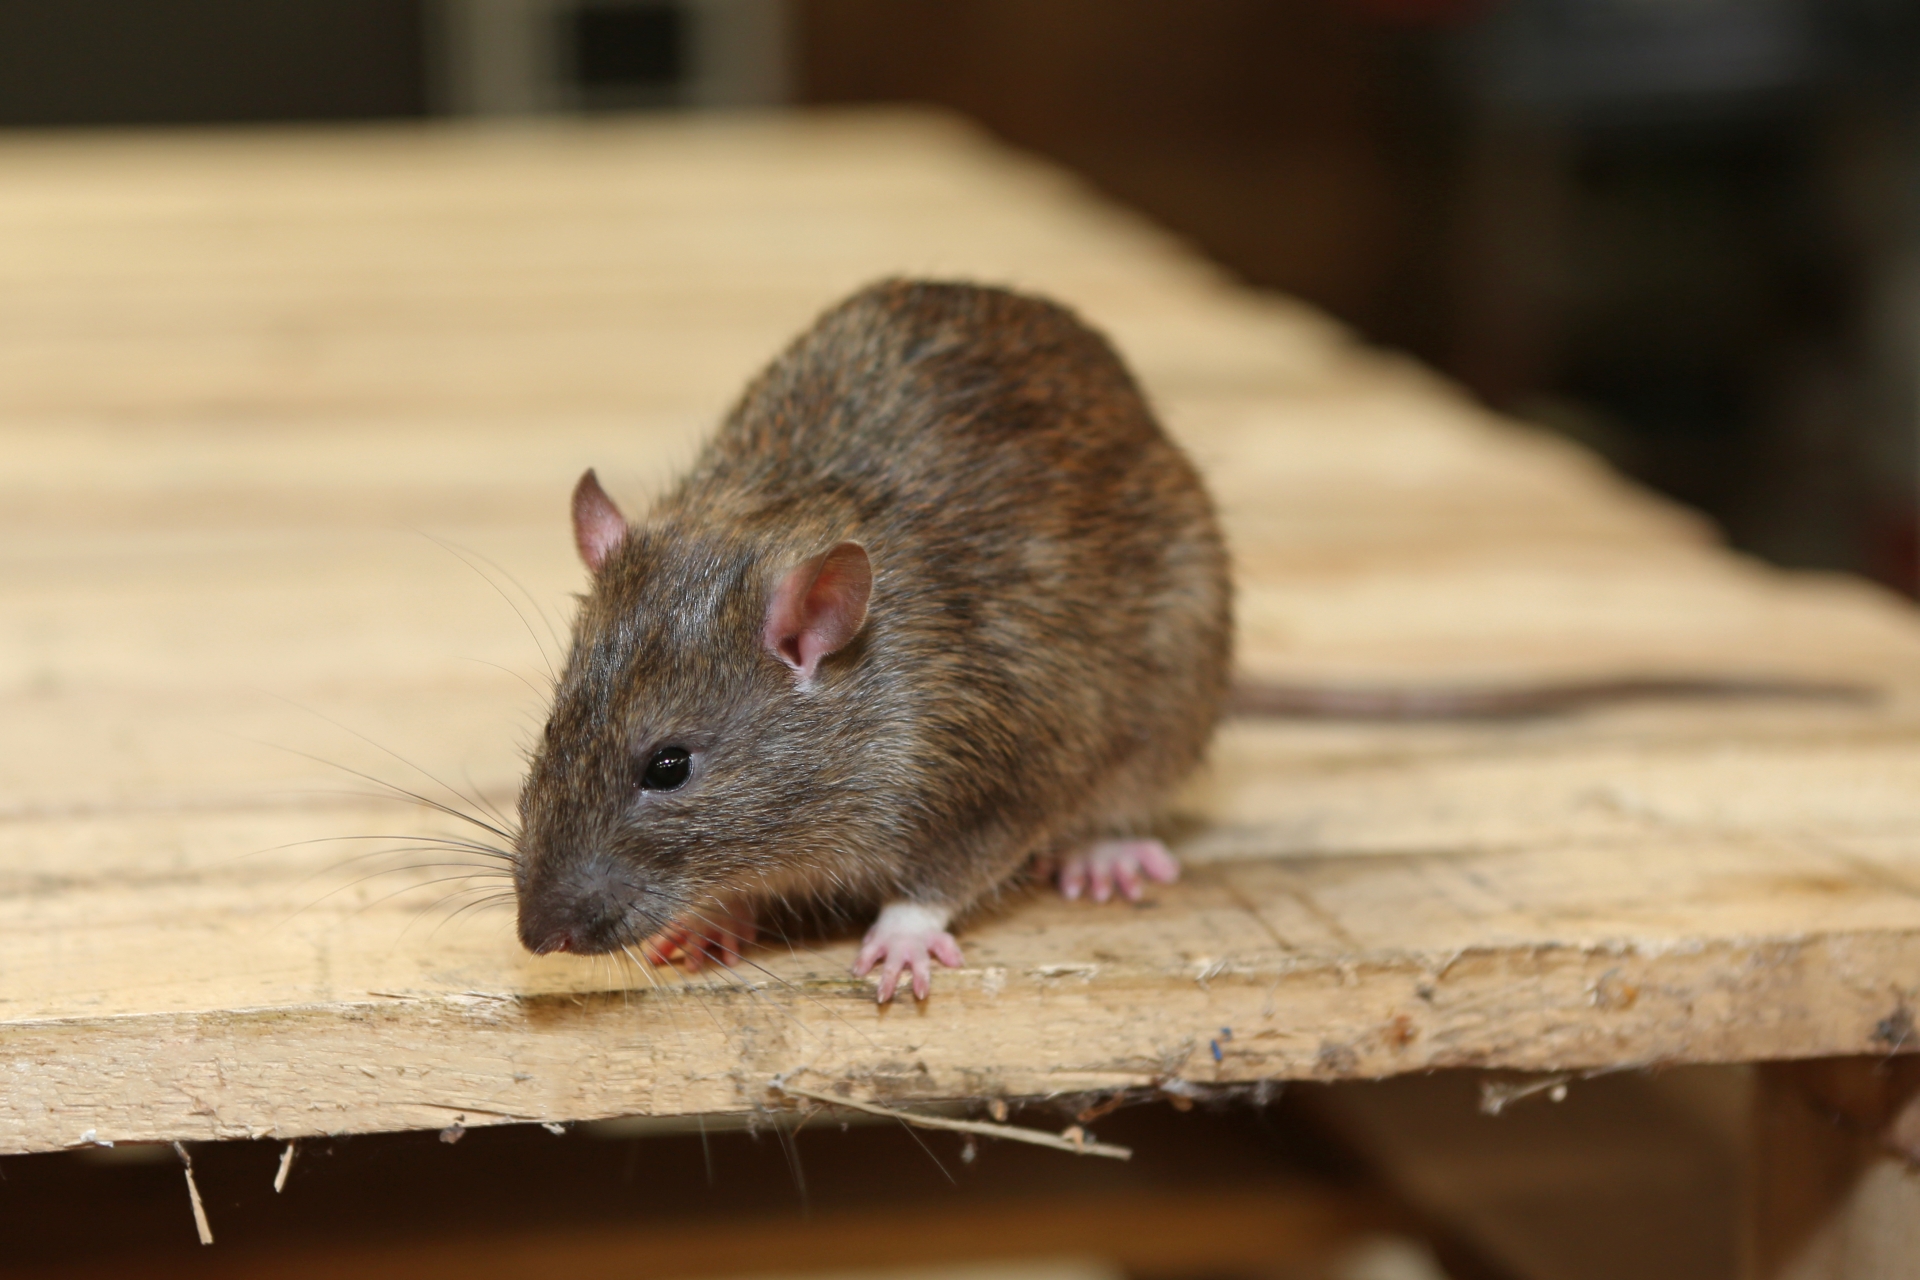 Rat Infestation, Pest Control in Forest Gate, Upton Park, E7. Call Now 020 8166 9746